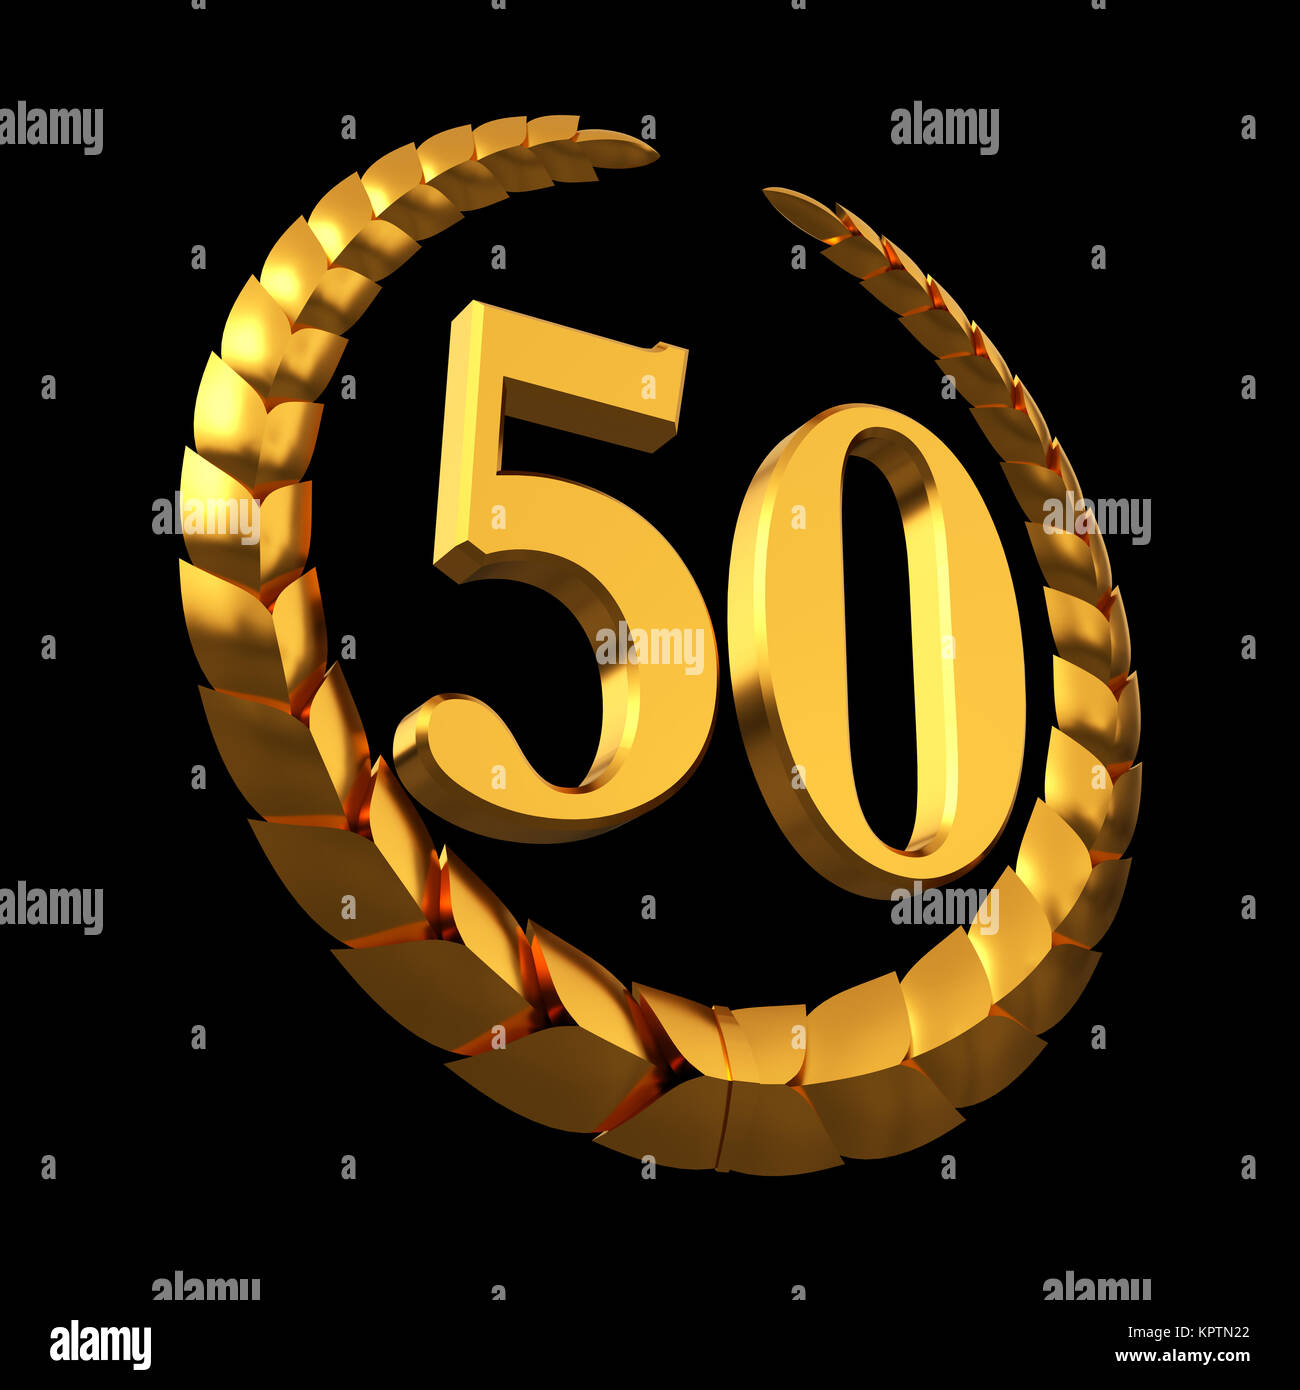 Anniversary Golden Laurel Wreath And Numeral 50 On Black Background Stock Photo